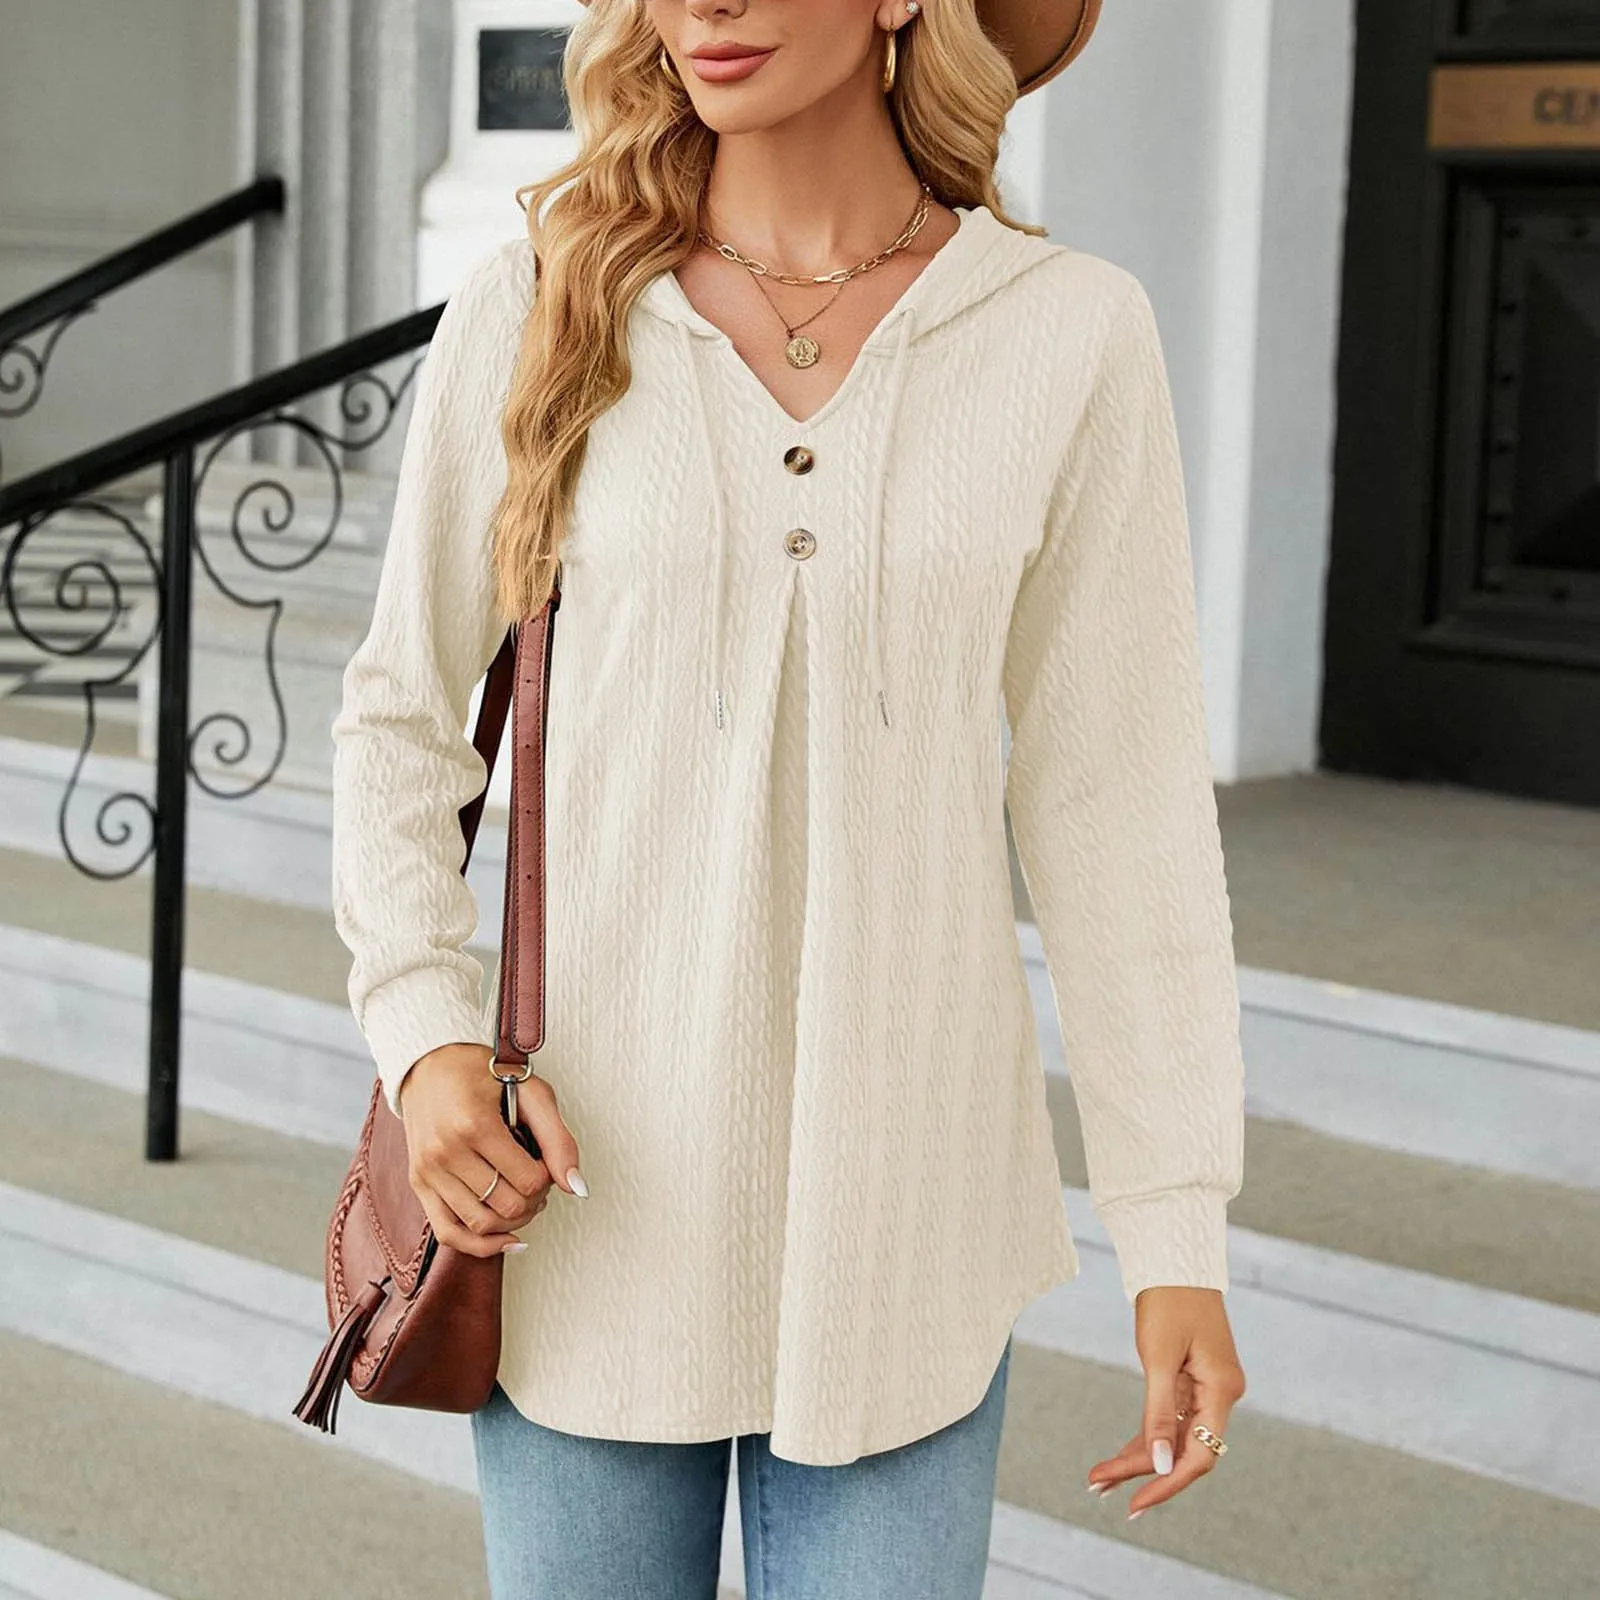 

Women Hooded Twist Jacquard T Shirt Casual V Neck Butumn Loose Tunic Solid Color Long Sleeve T-Shirts Comfy Tee Tops Camiseta